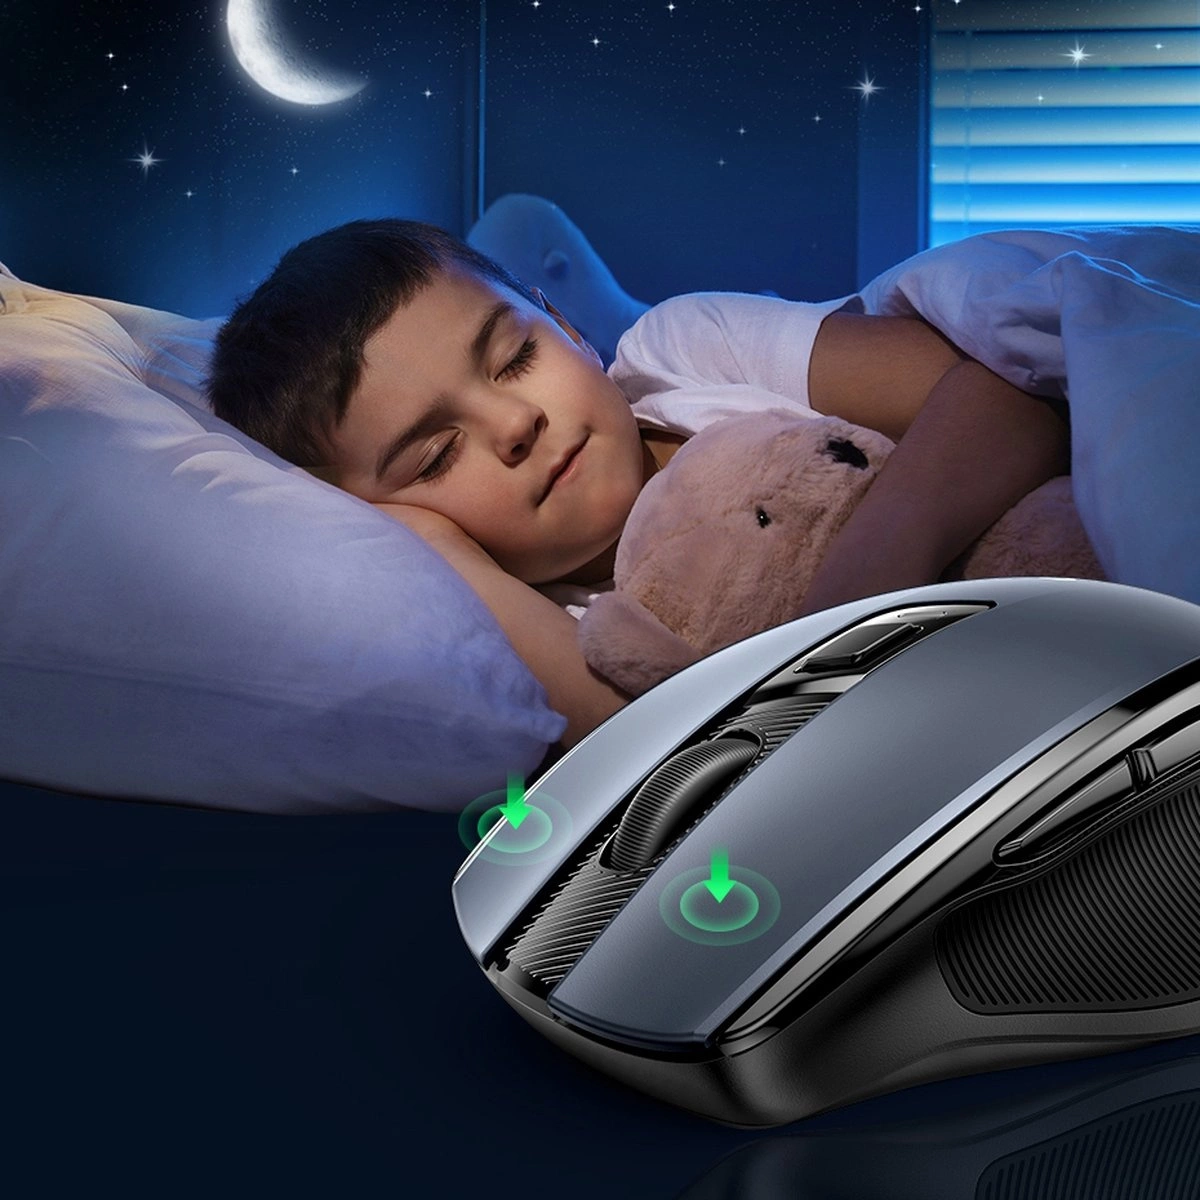 In the foreground, the Ugreen MU006 wireless optical mouse, in the background, a sleeping boy